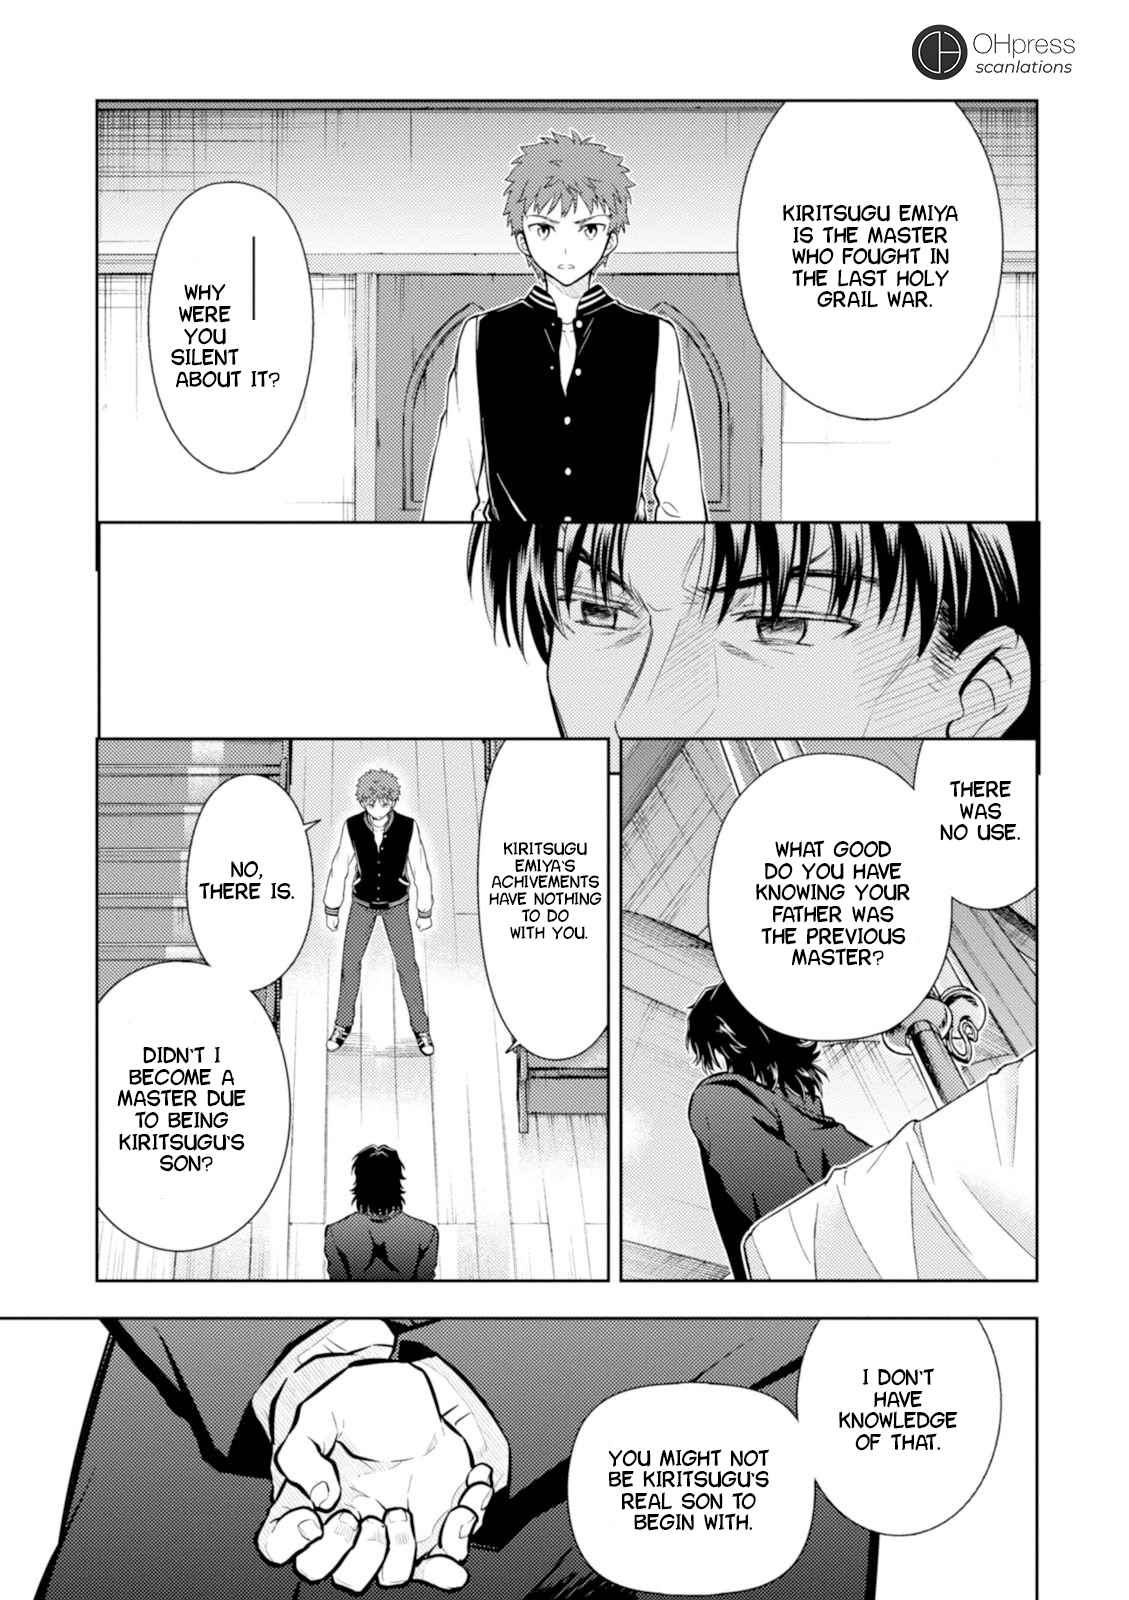 Fate/stay night: Heaven's Feel Vol. 3 Ch. 14 Day 4 / The Holy Grail War, And It's Beginning (3)